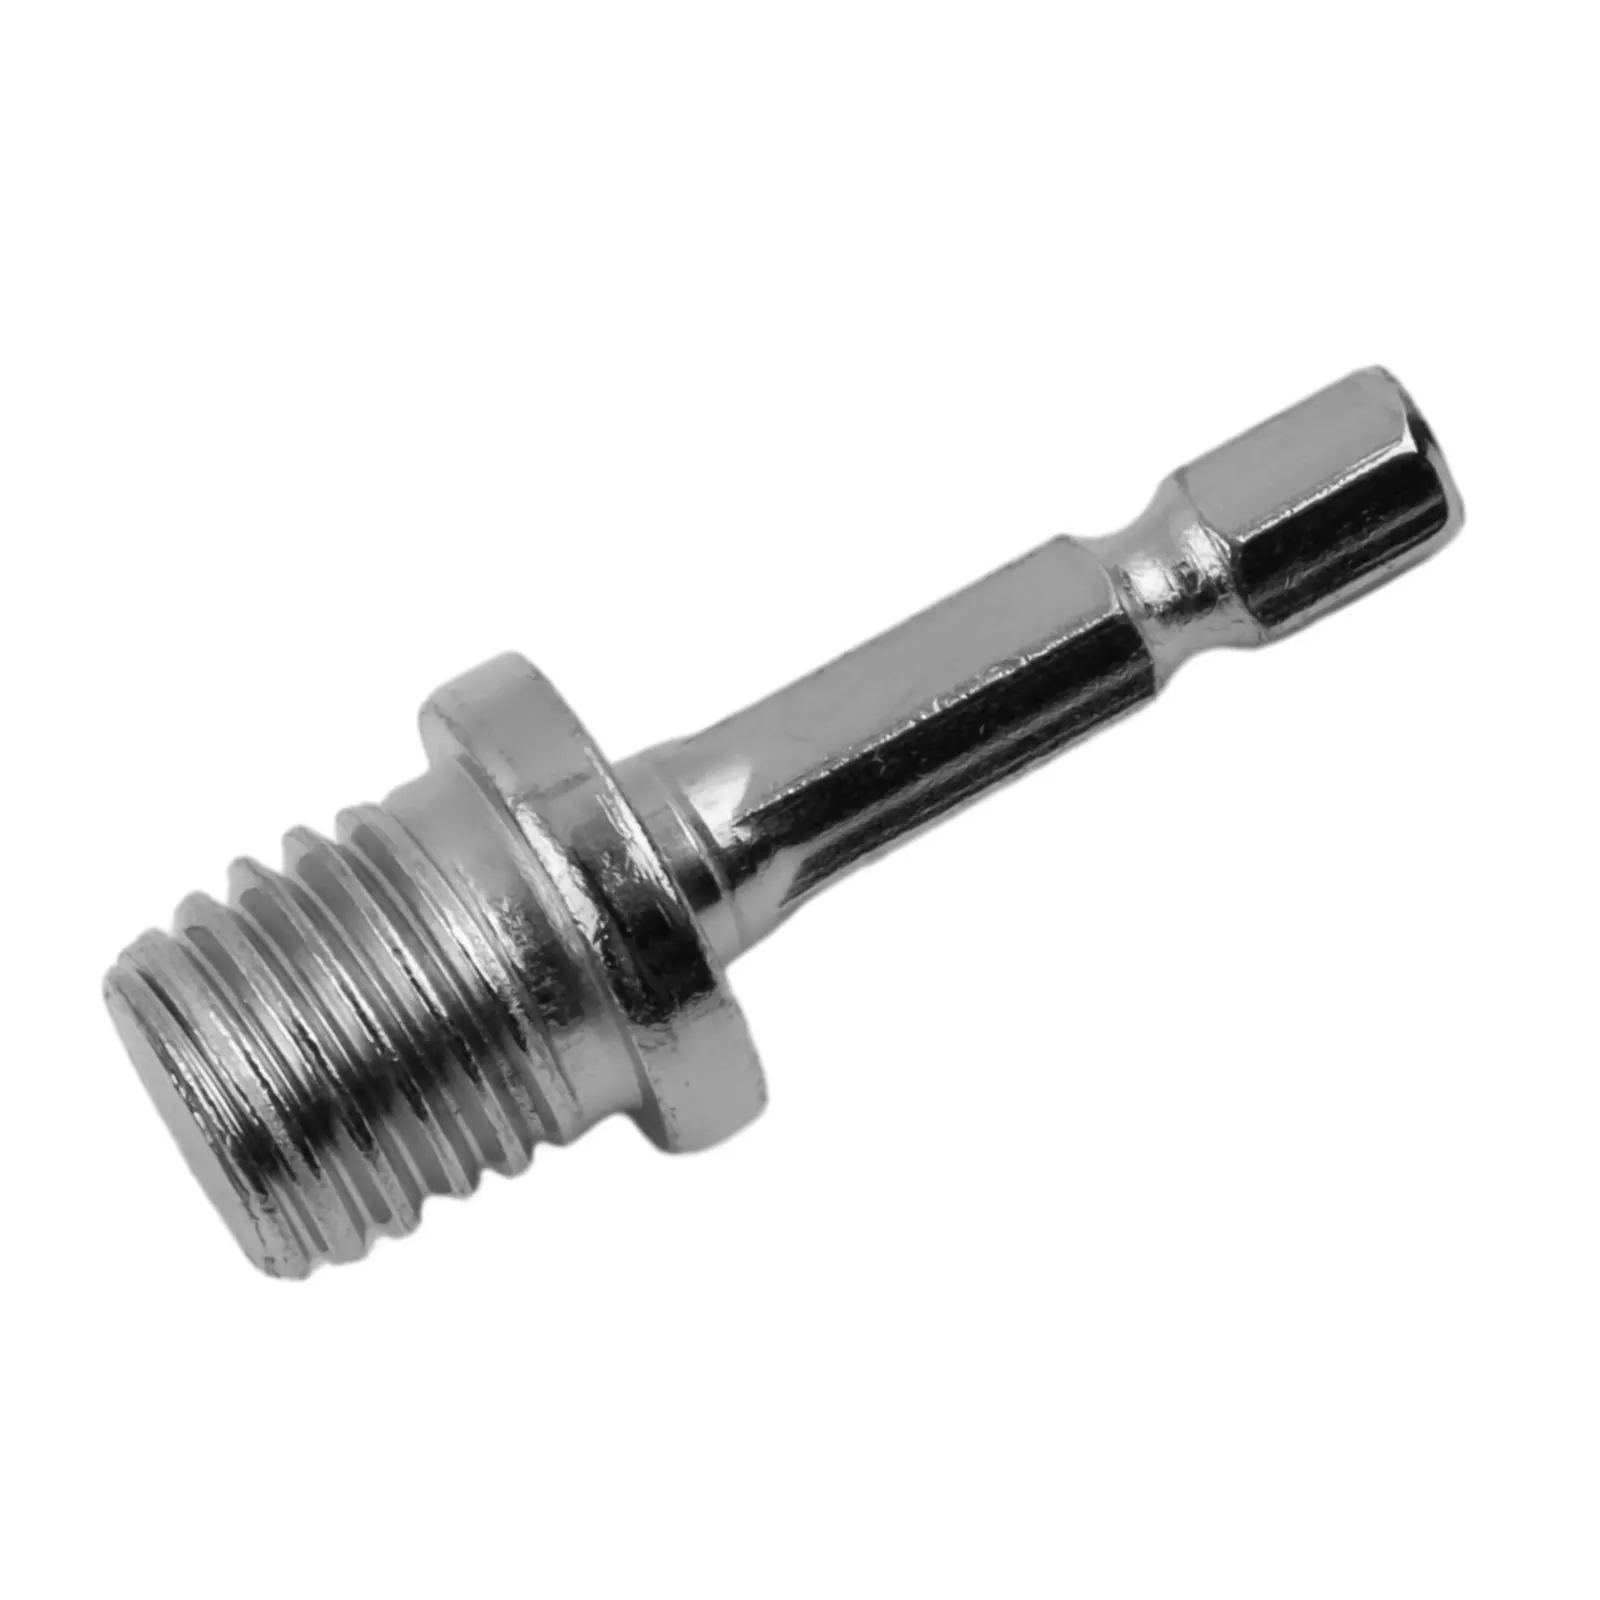 

1pcs M14 Screw Drill Adapter Screw Thread Angle Mill For Electric Drill Hand Connection Adapter Rod Power Tools Accessories